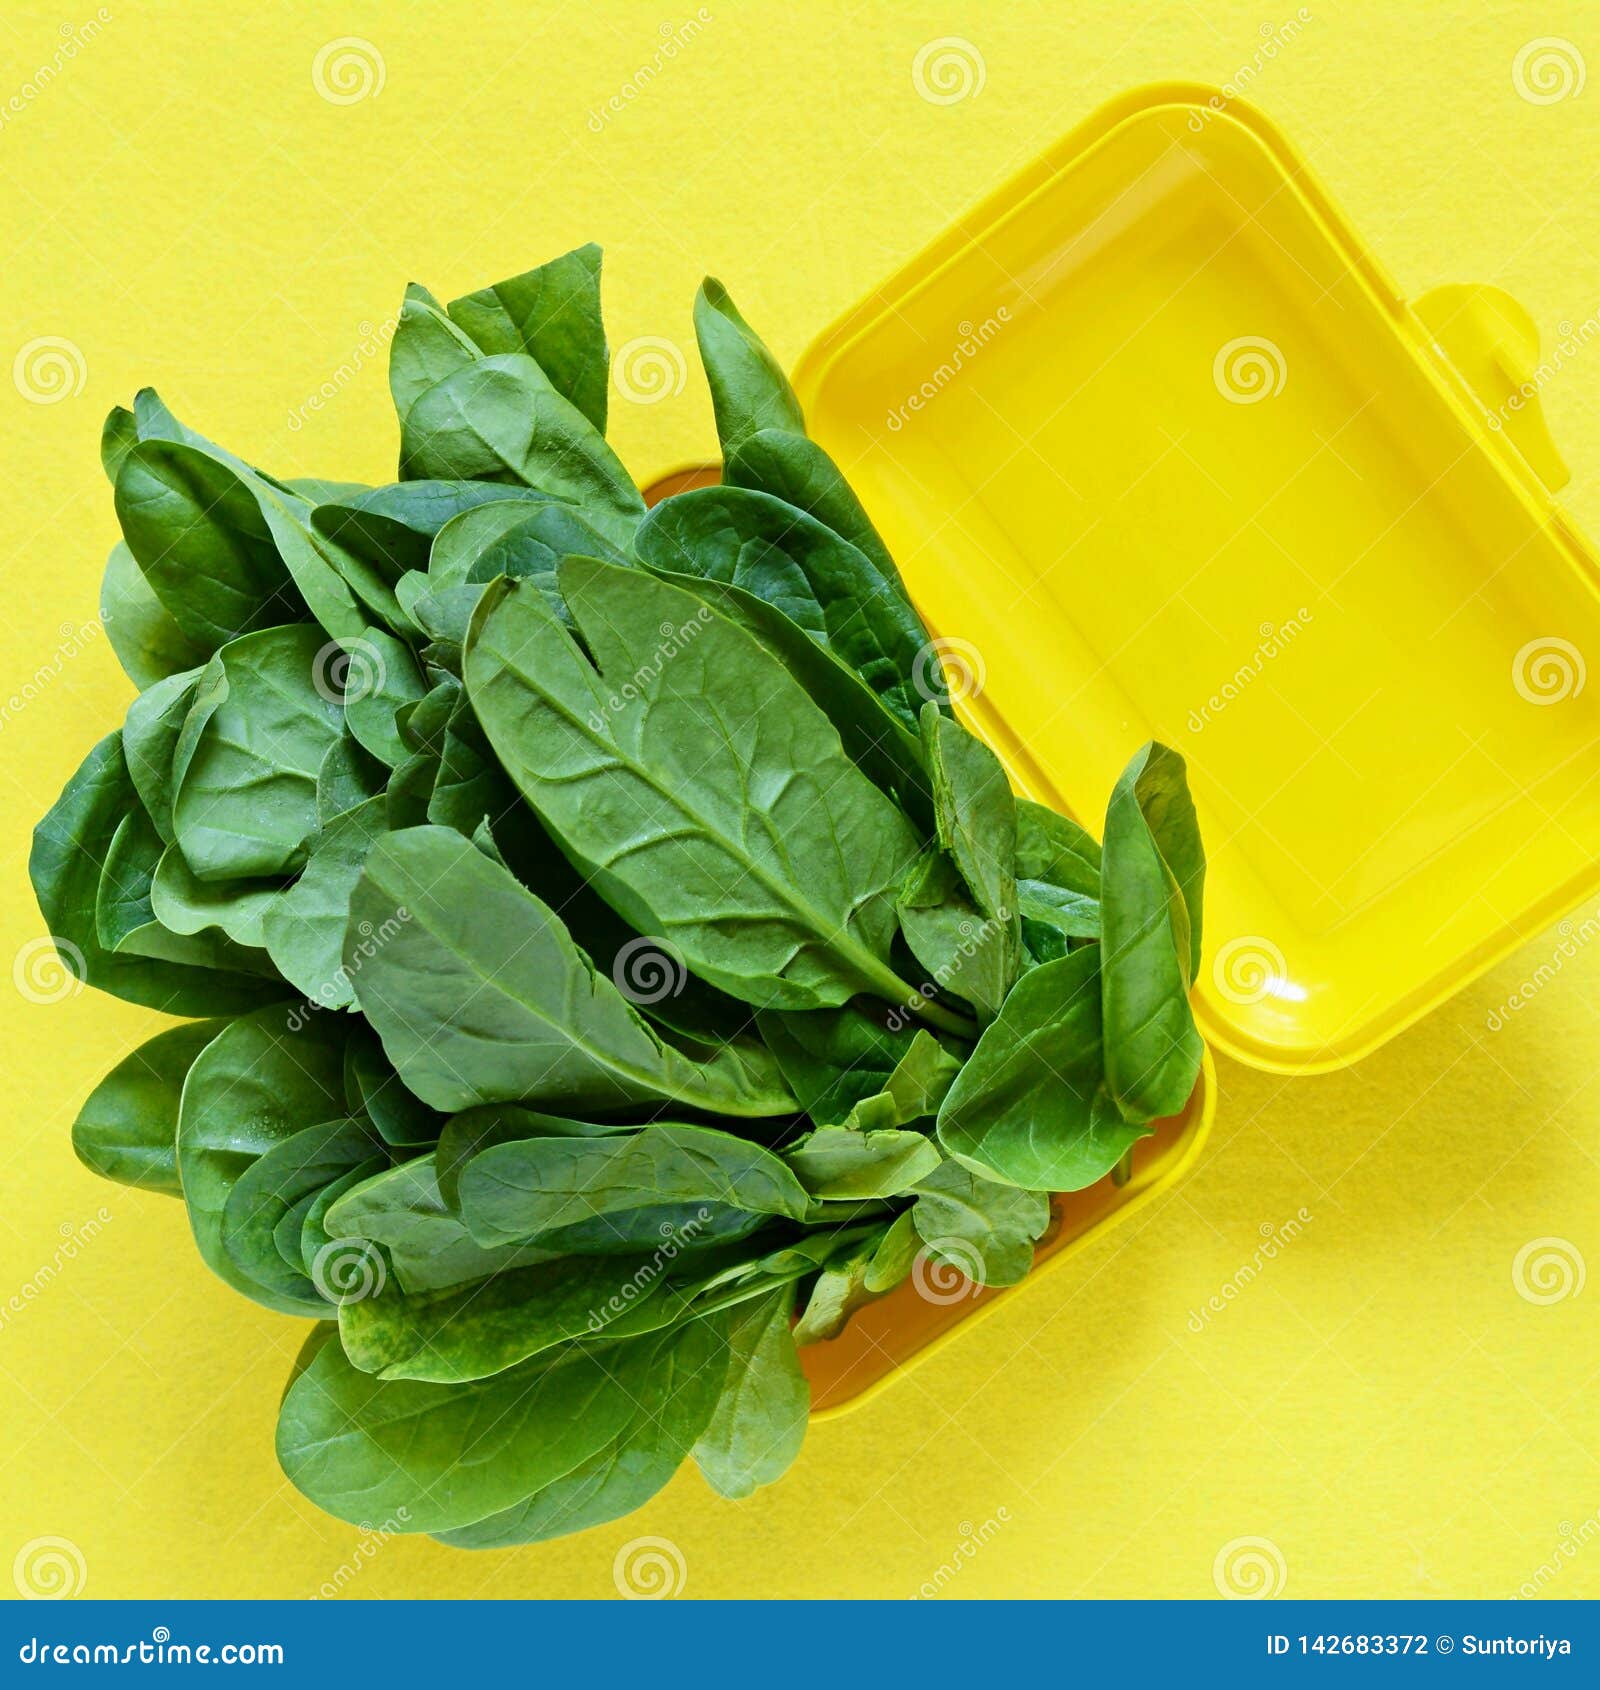 Download A Bunch Of Fresh Spinach In A Yellow Lunch Box On A Yellow Background Healthy Eating Concept Plastic Container Green Spin Stock Photo Image Of Food Natural 142683372 Yellowimages Mockups